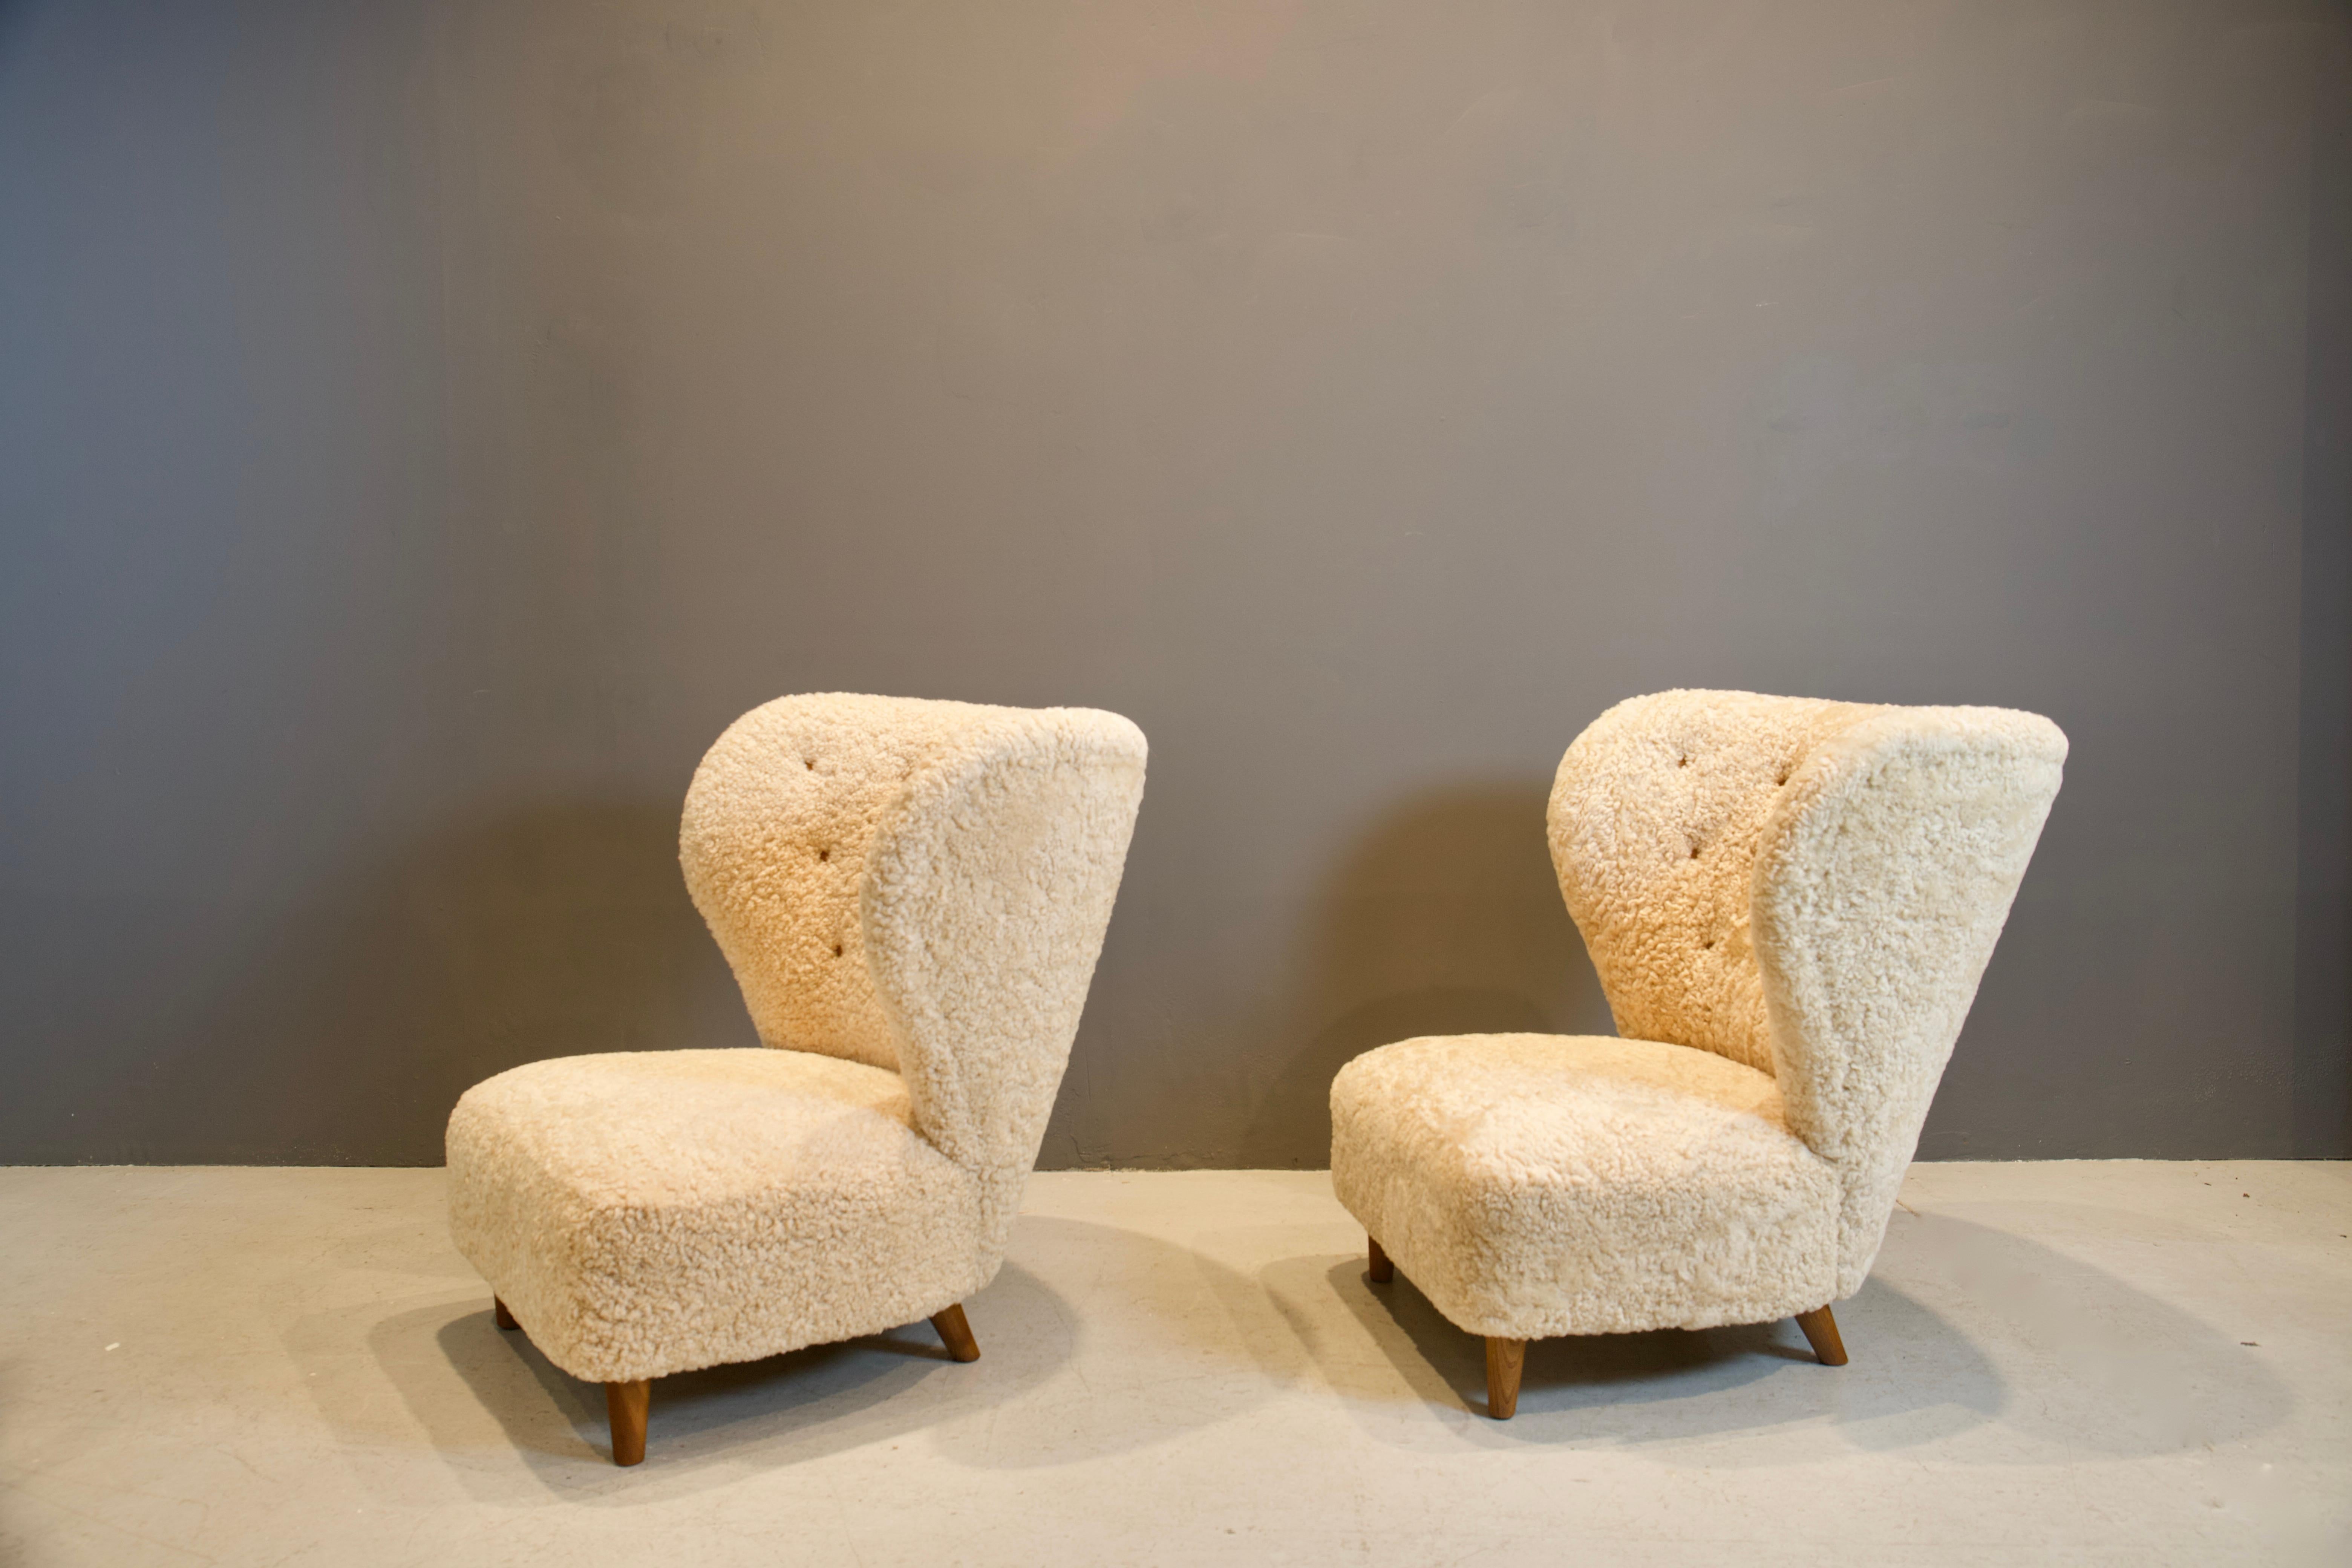 Sculptural pair of Scandinavian low chairs, newly upholstered in light beige shearling hides, with brown leather button details. Round tapered oak legs.
Beautiful form and luxurious comfort.

These chairs are available to view in my NY gallery.